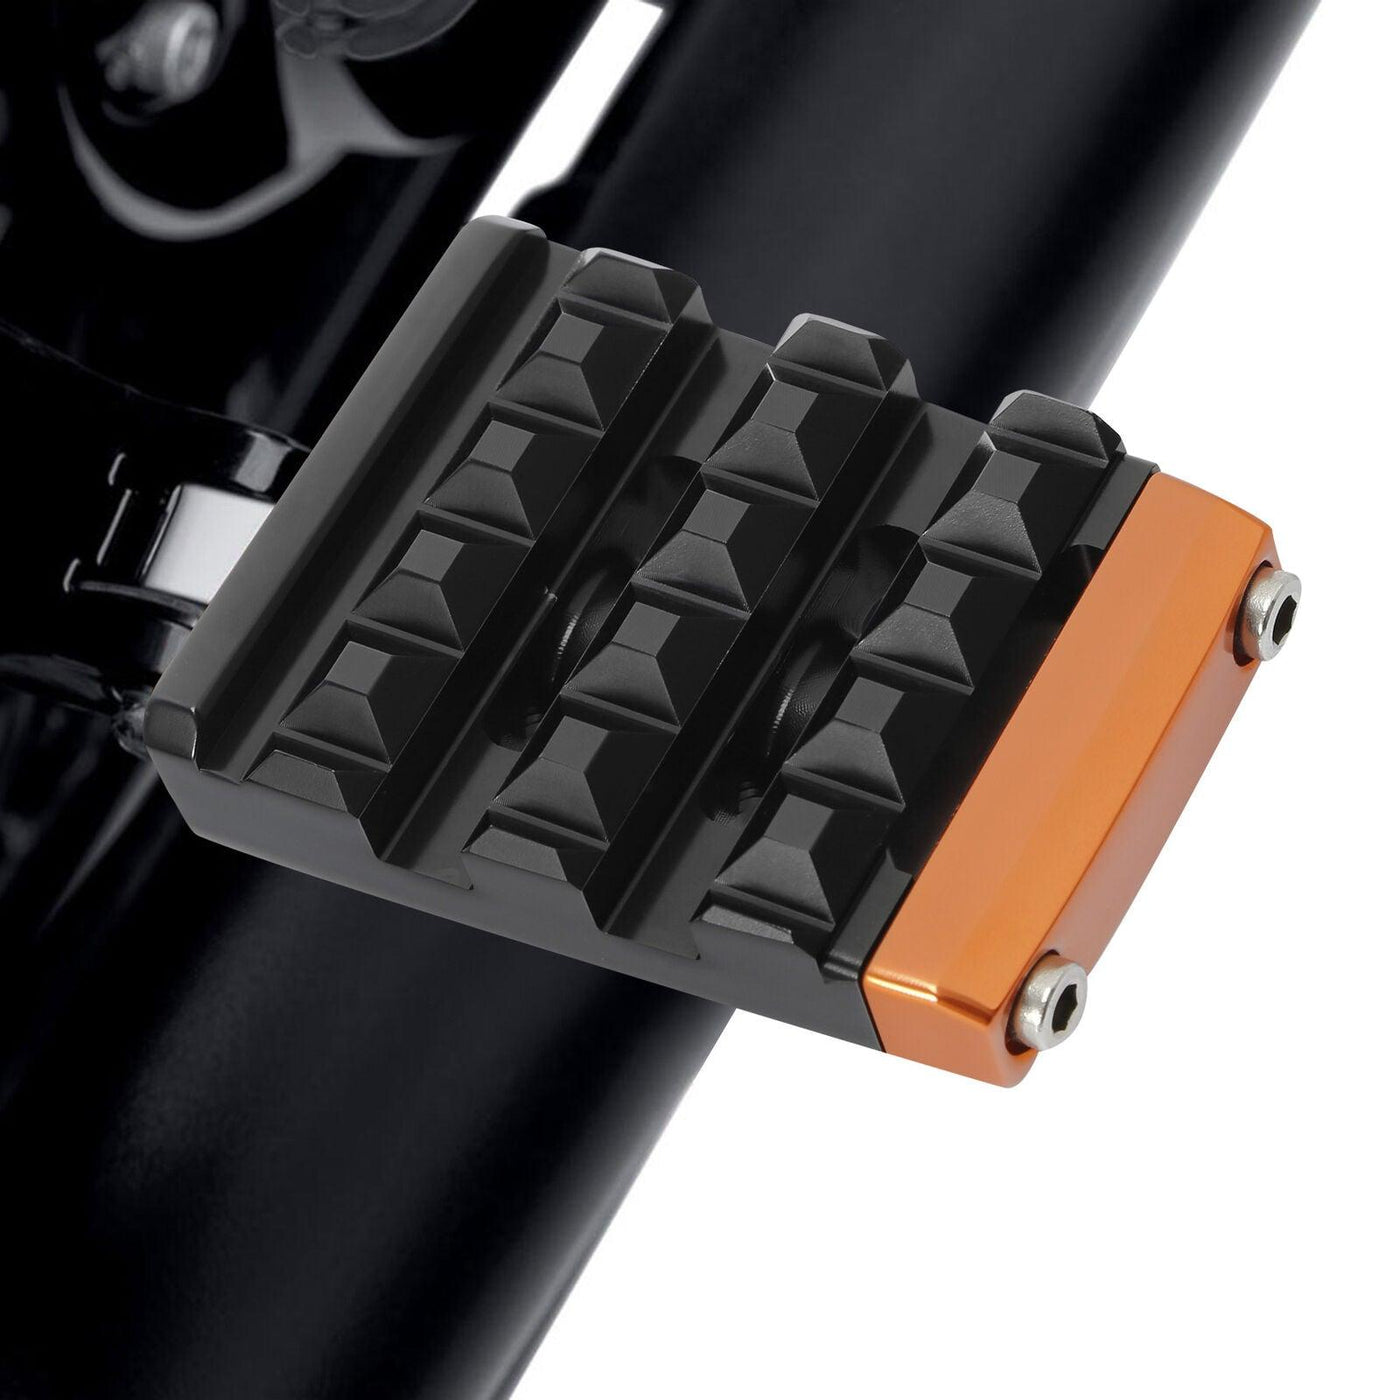 Aluminum Passenger Foot Pegs Footrest Fit For Harley Touring Sportster Softail - Moto Life Products